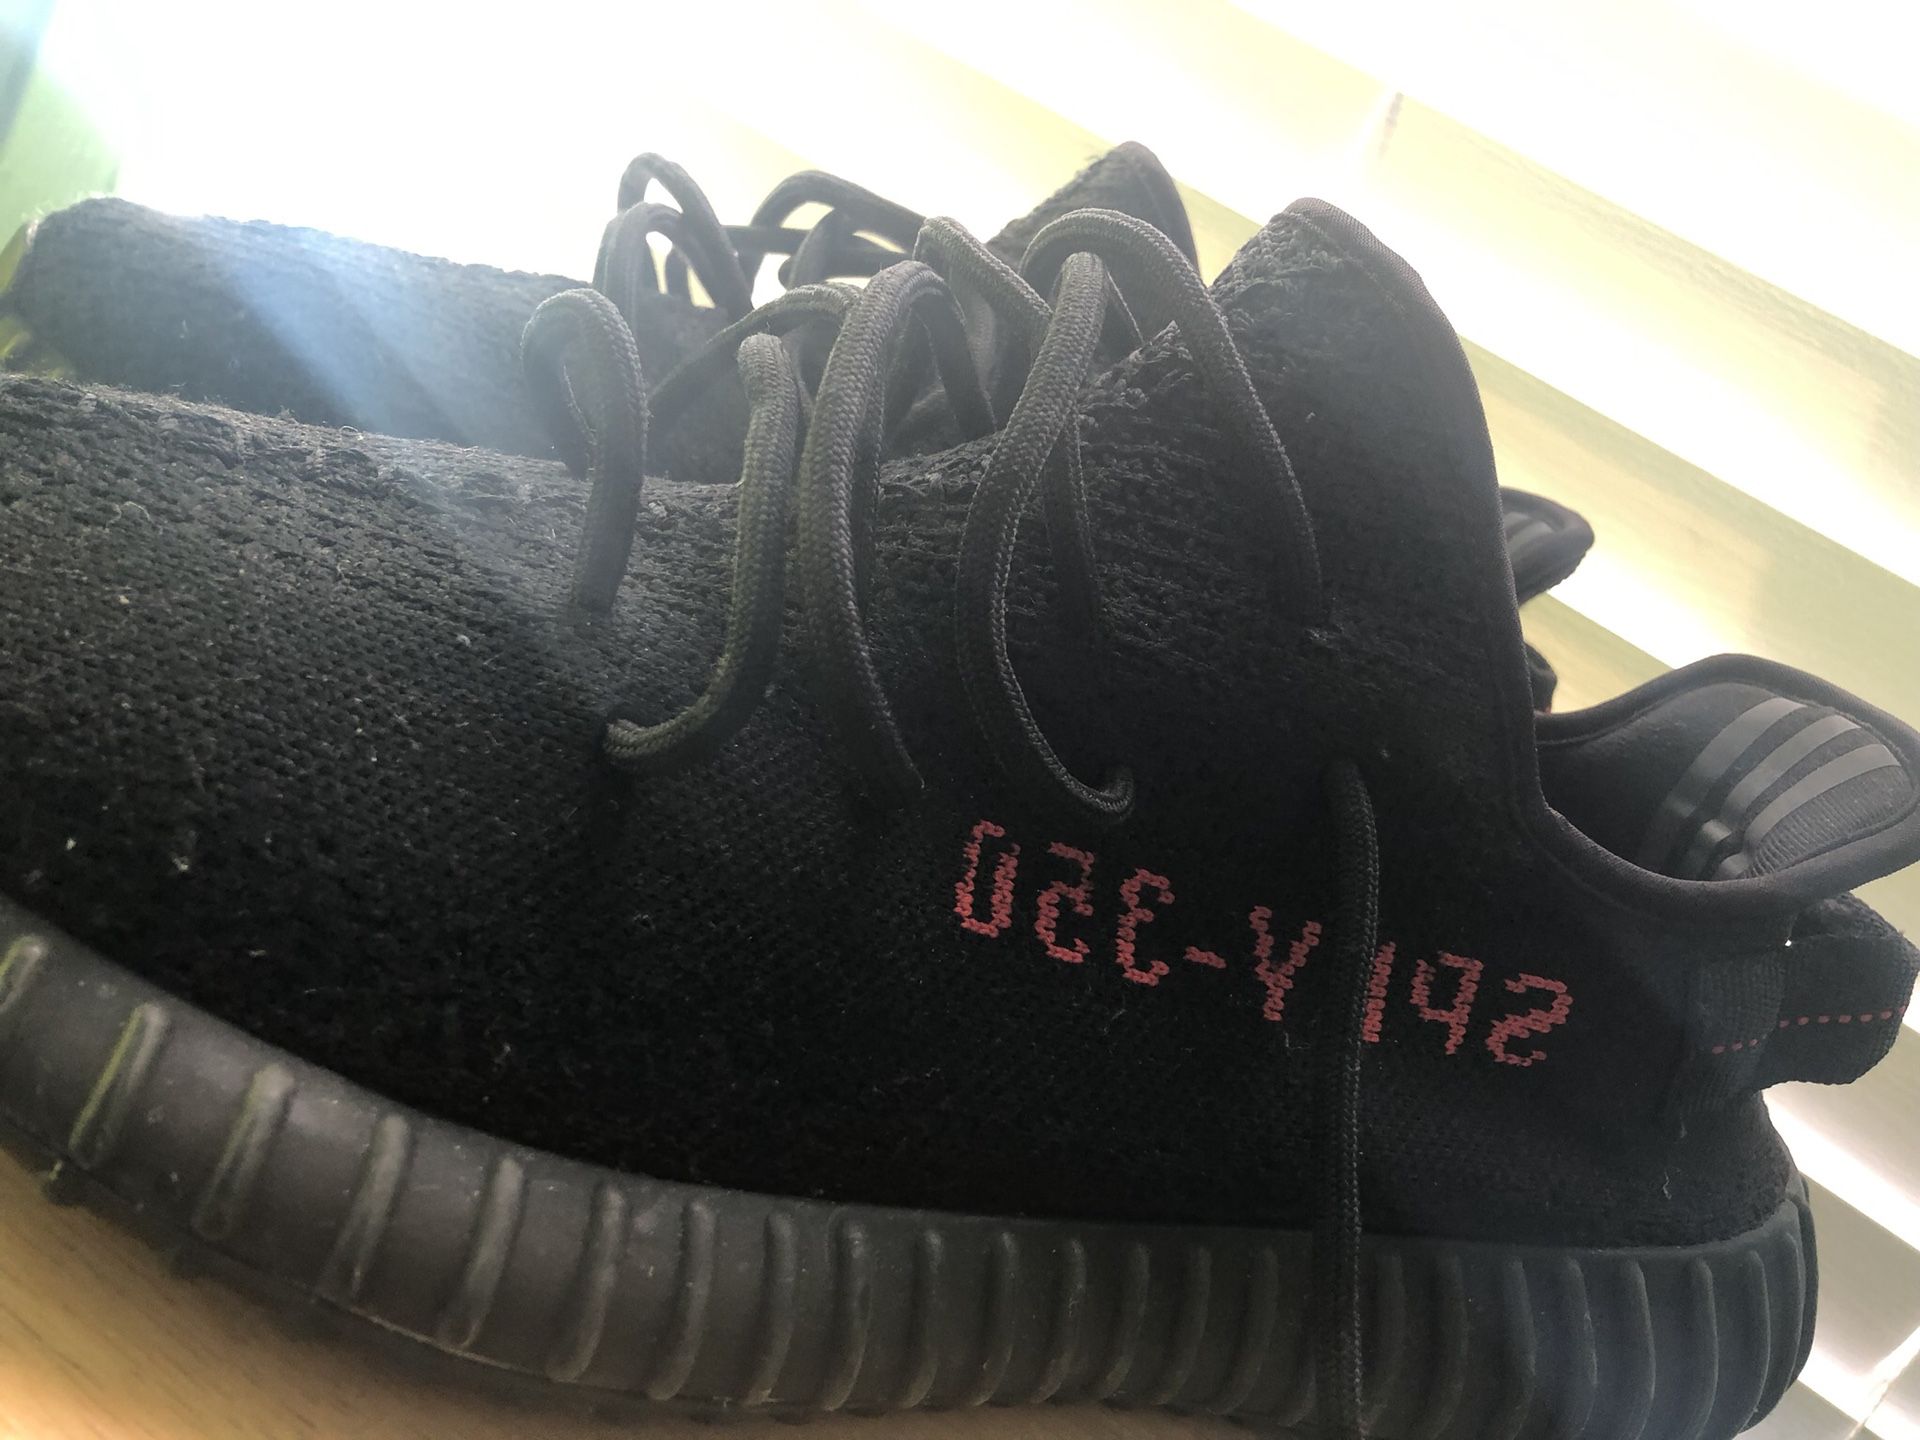 Adidas Yeezy Boost 350 V2 “Breds” (purchased from Receipt Included for Sale in STUYVSNT PLZ, NY -